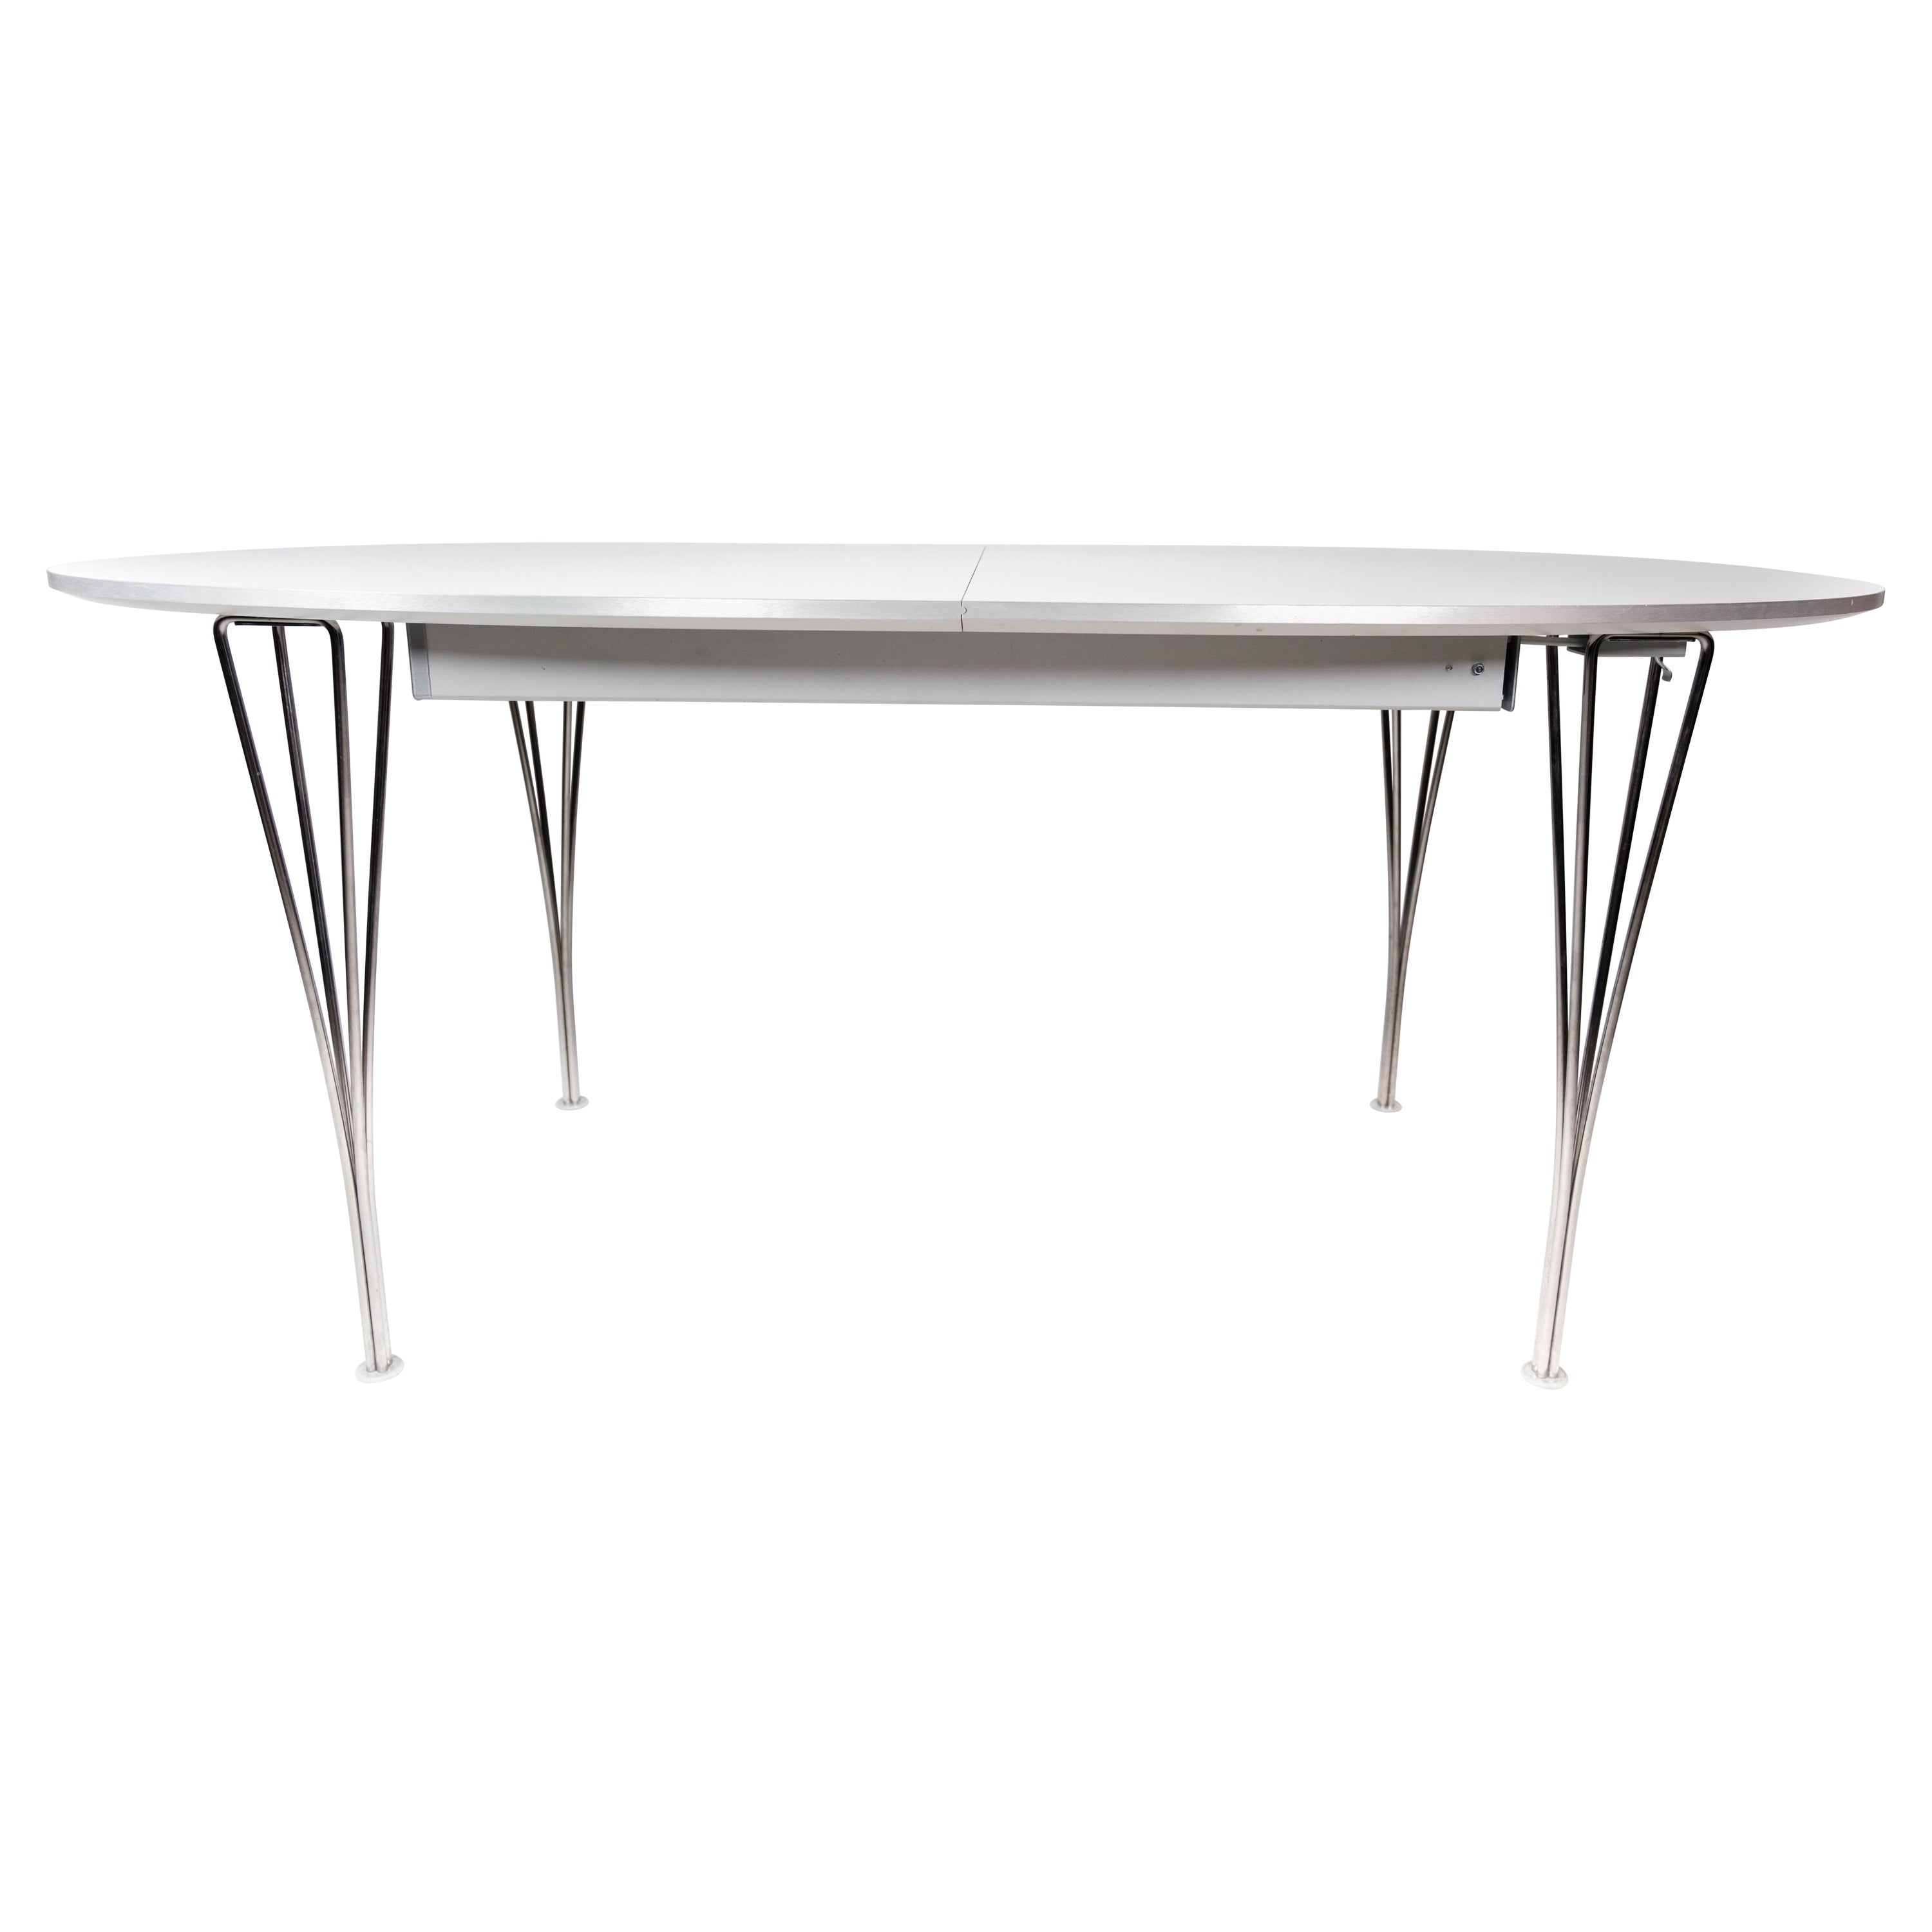 Super Ellipse Dining Table With White Laminate Designed By Piet Hein From 2011 For Sale